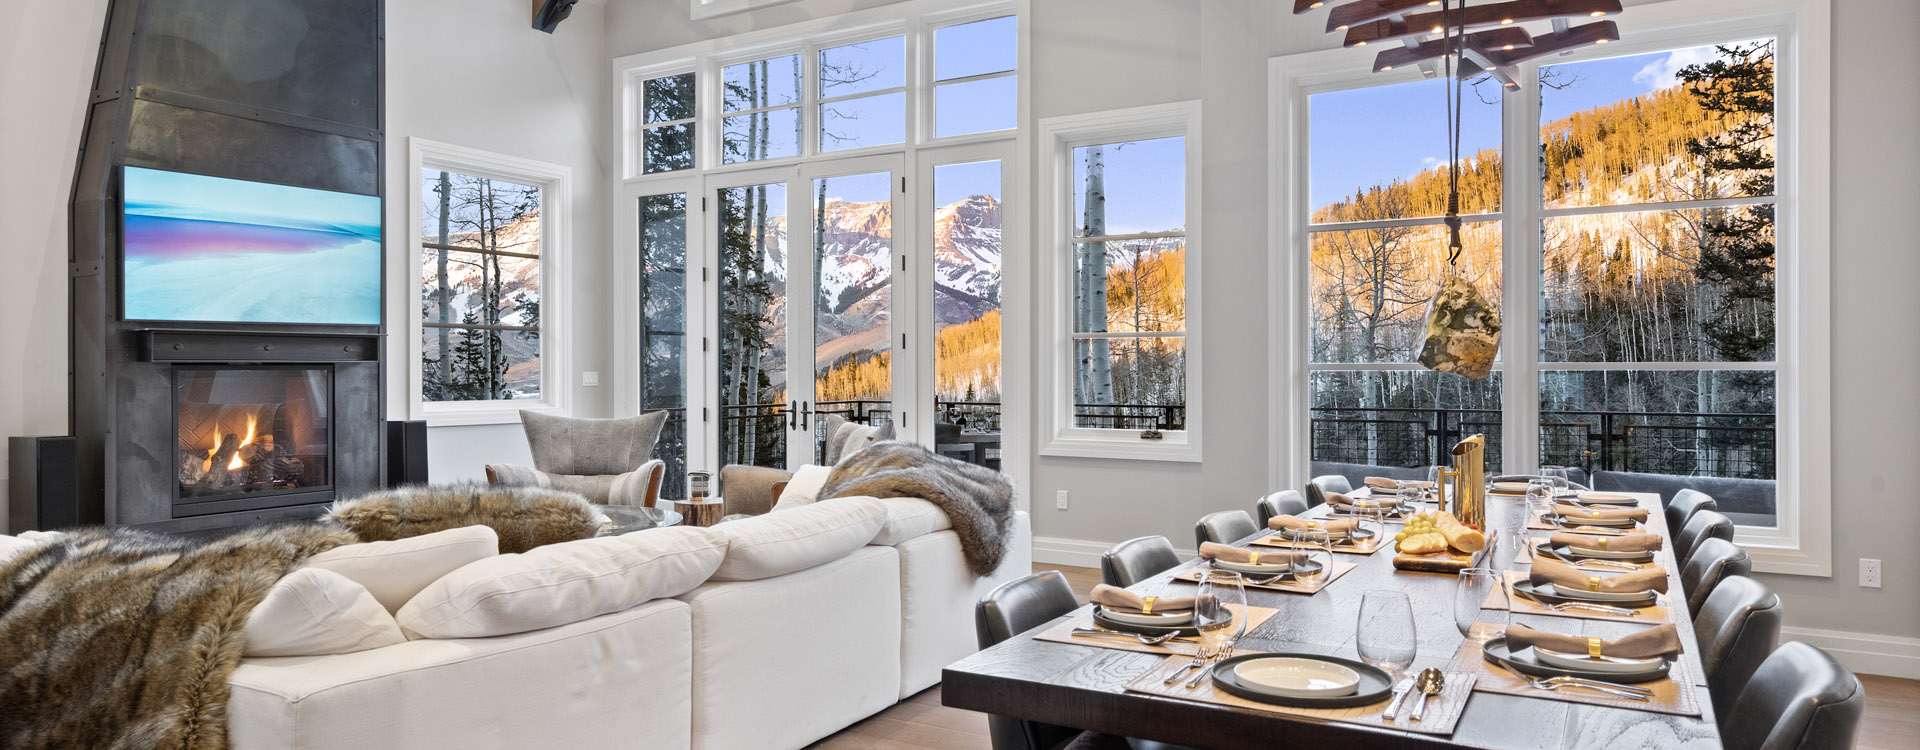 1.01-Fire-and-Ice-Mountain-Village-Vacation-Rental-Dining-11